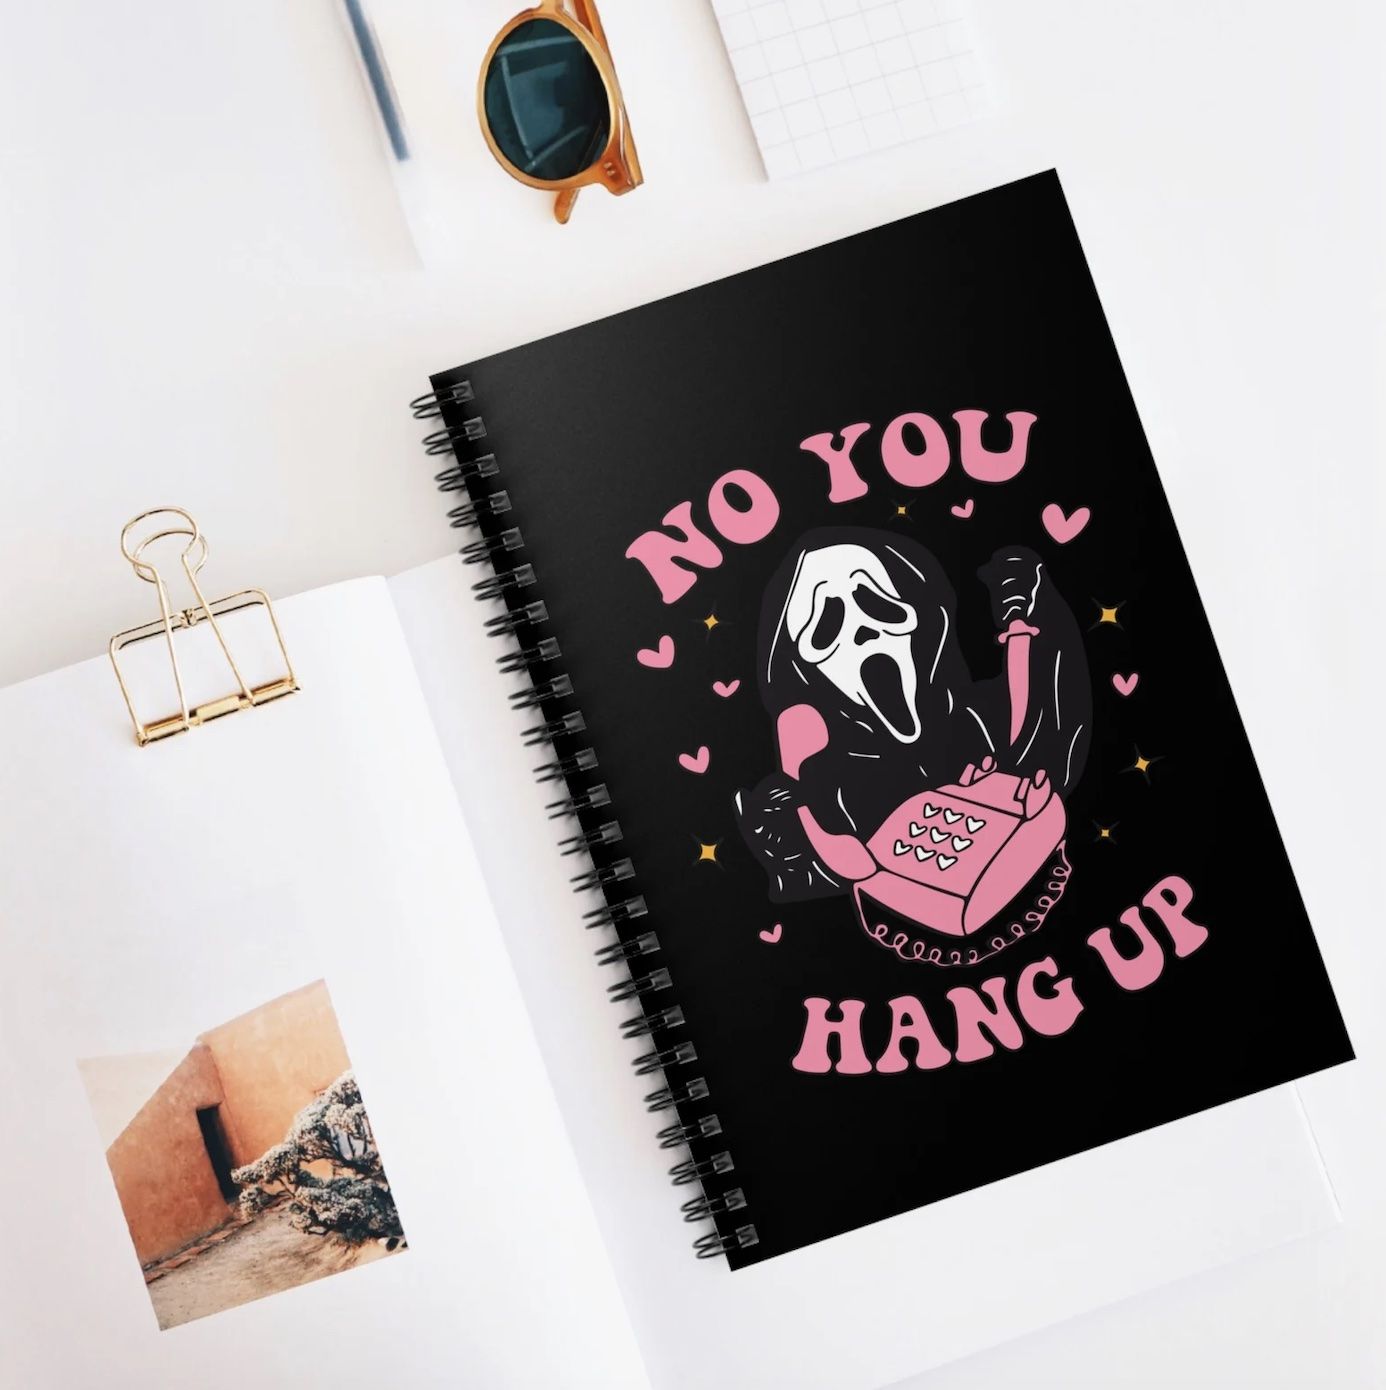 Black spiral notebook with the scream mask, telephone, and the words 